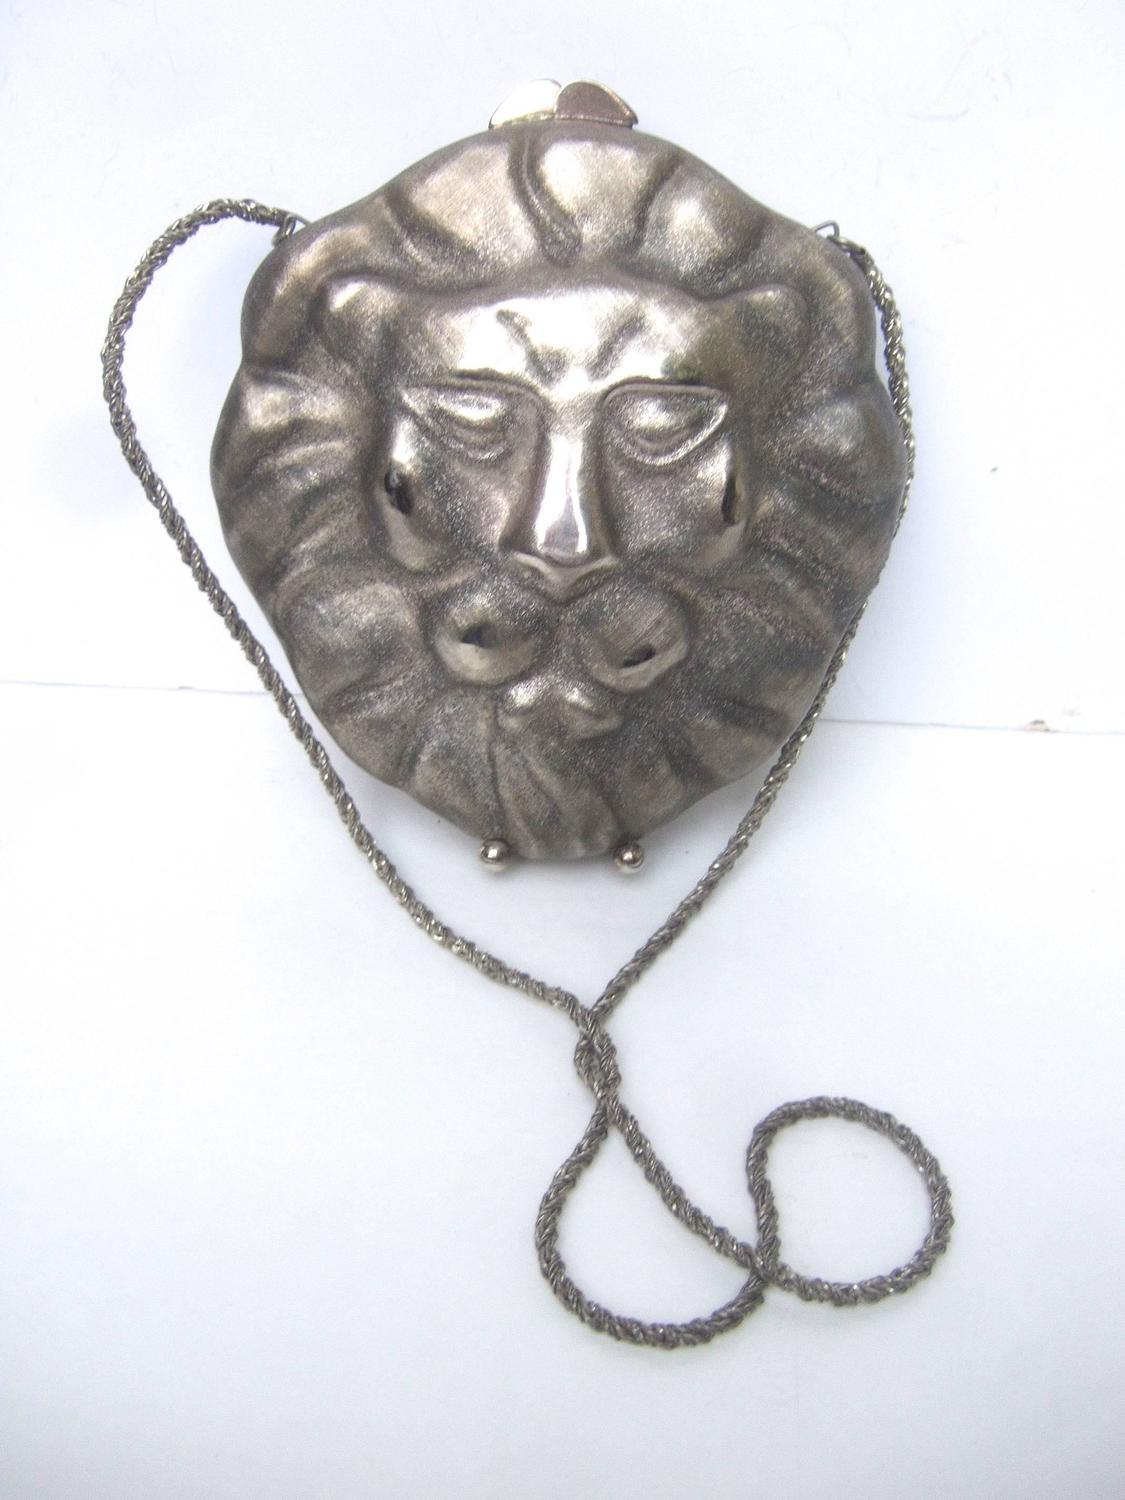 Neiman Marcus Opulent Silver Metal Lion Evening Bag c 1970s For Sale at 1stdibs